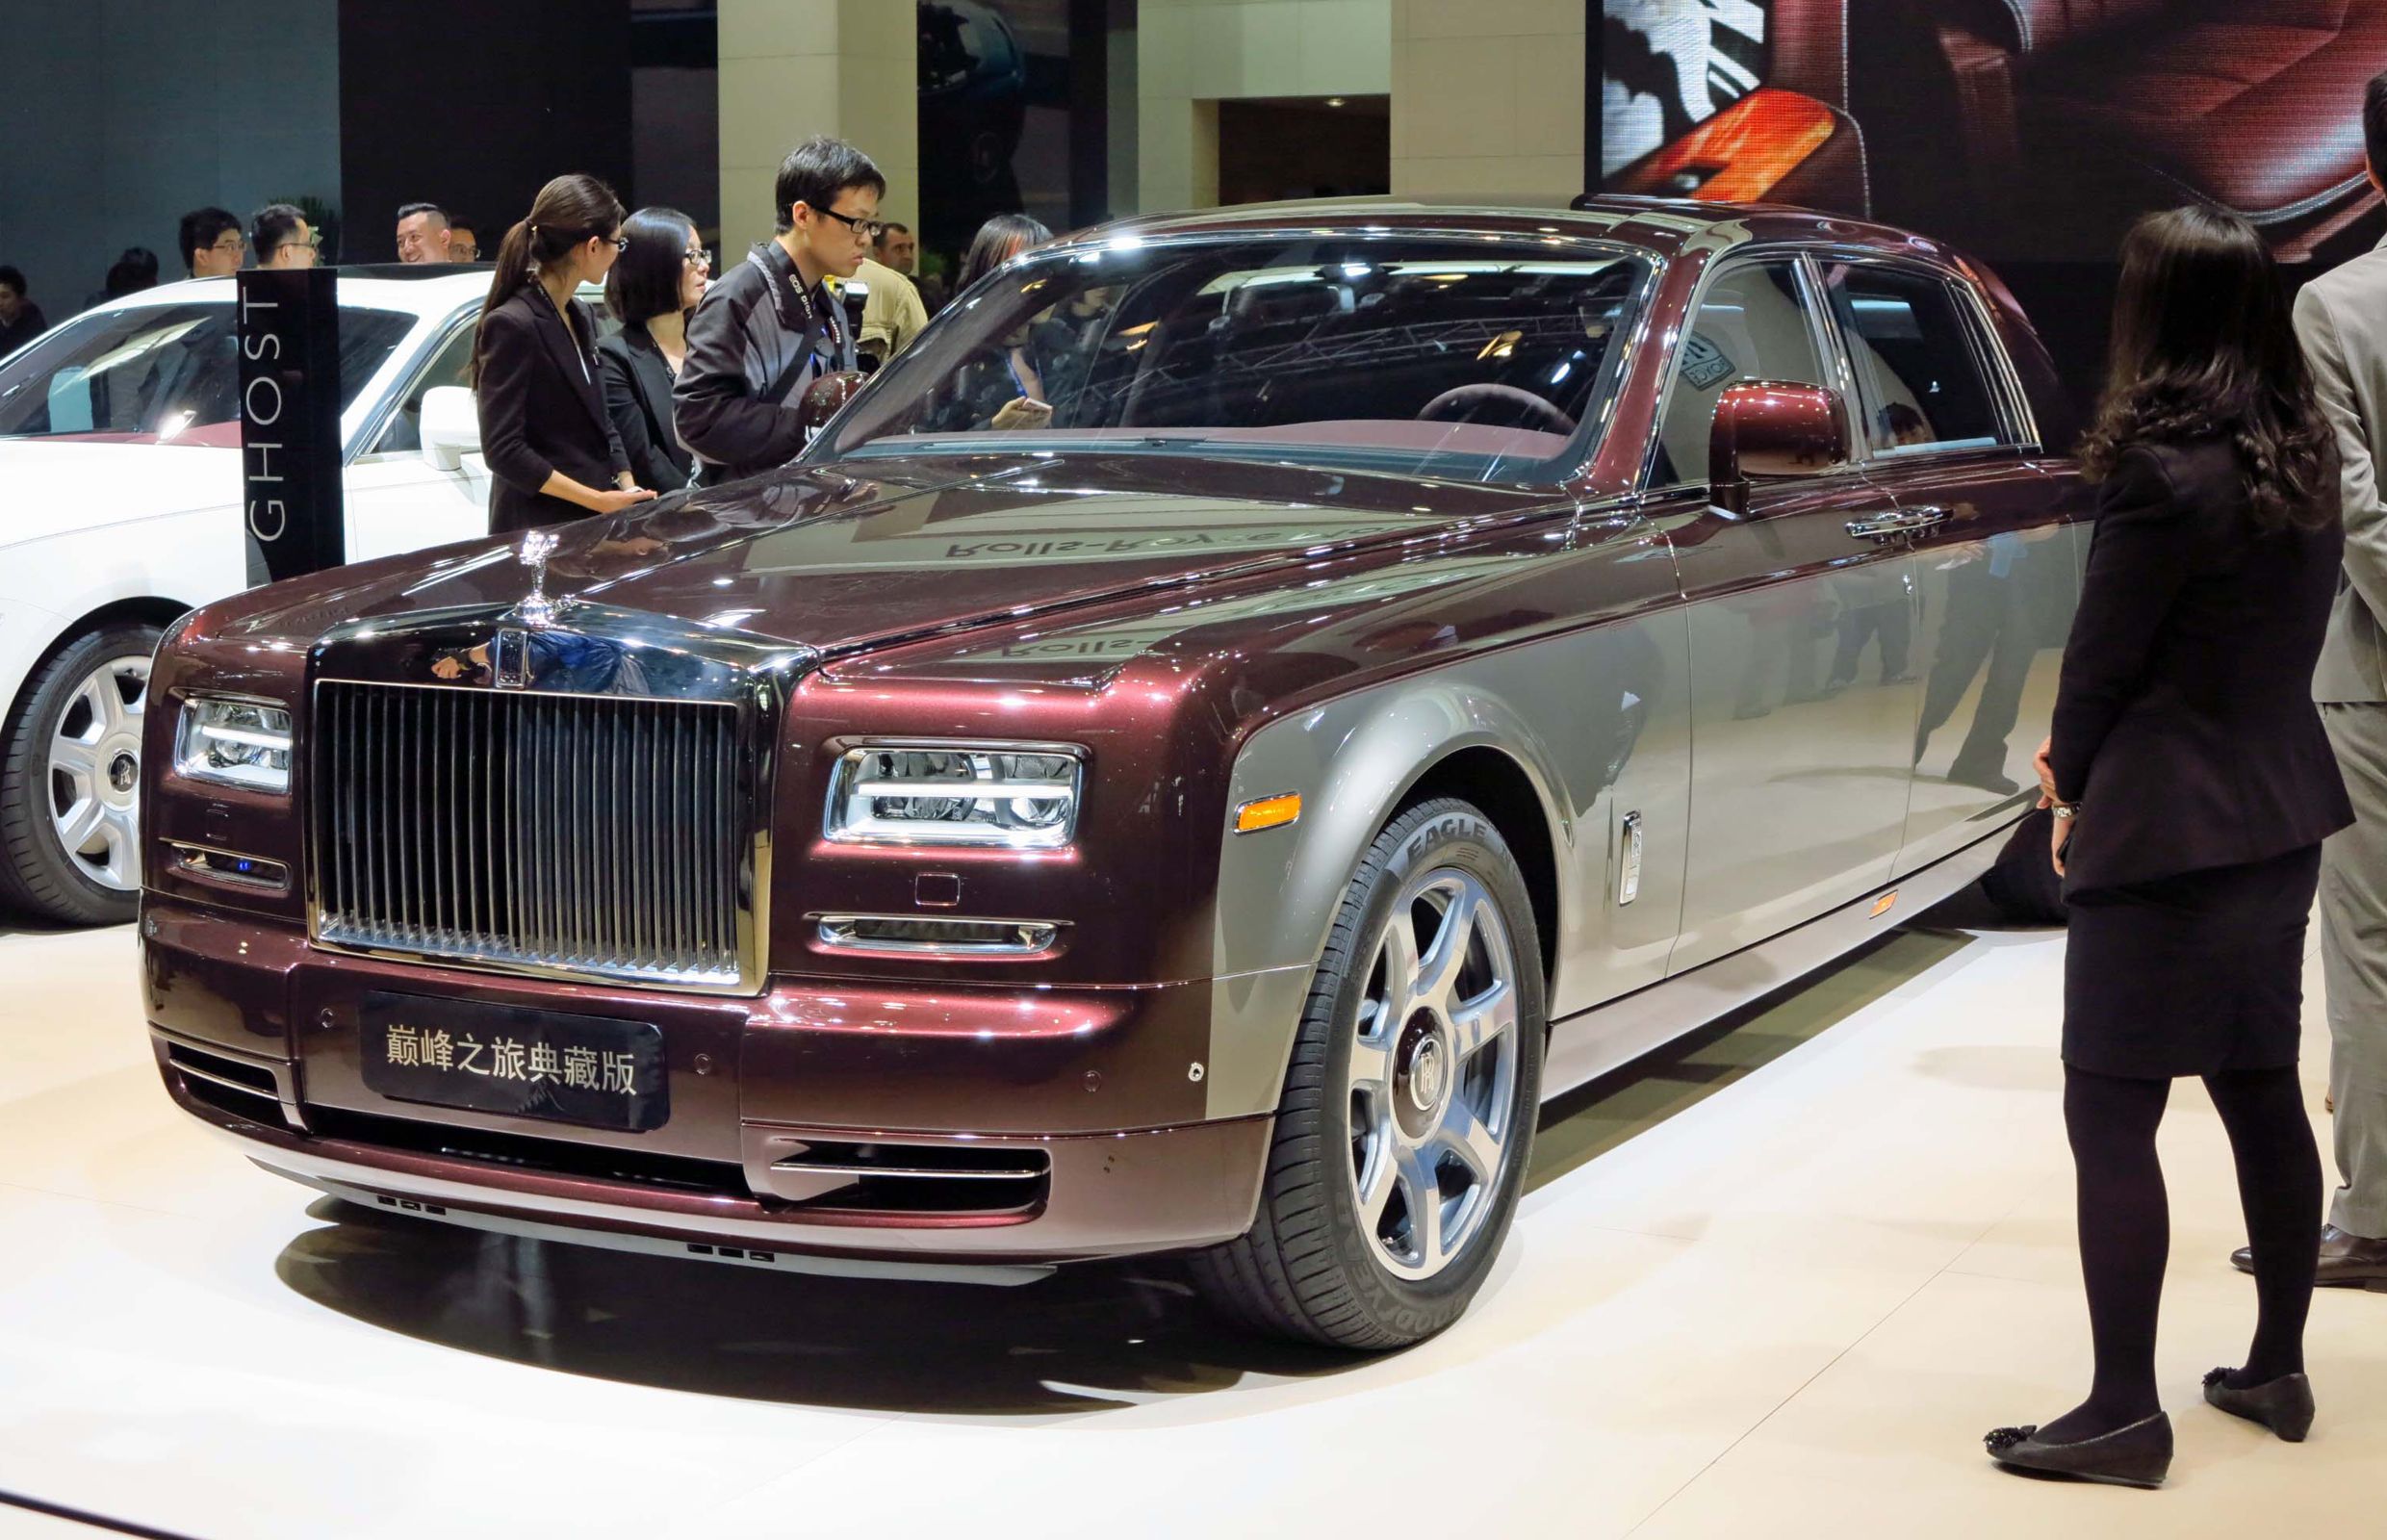 Another Rolls Royce Phantom  Picture of J3 Private Hong Kong Experience   Tripadvisor